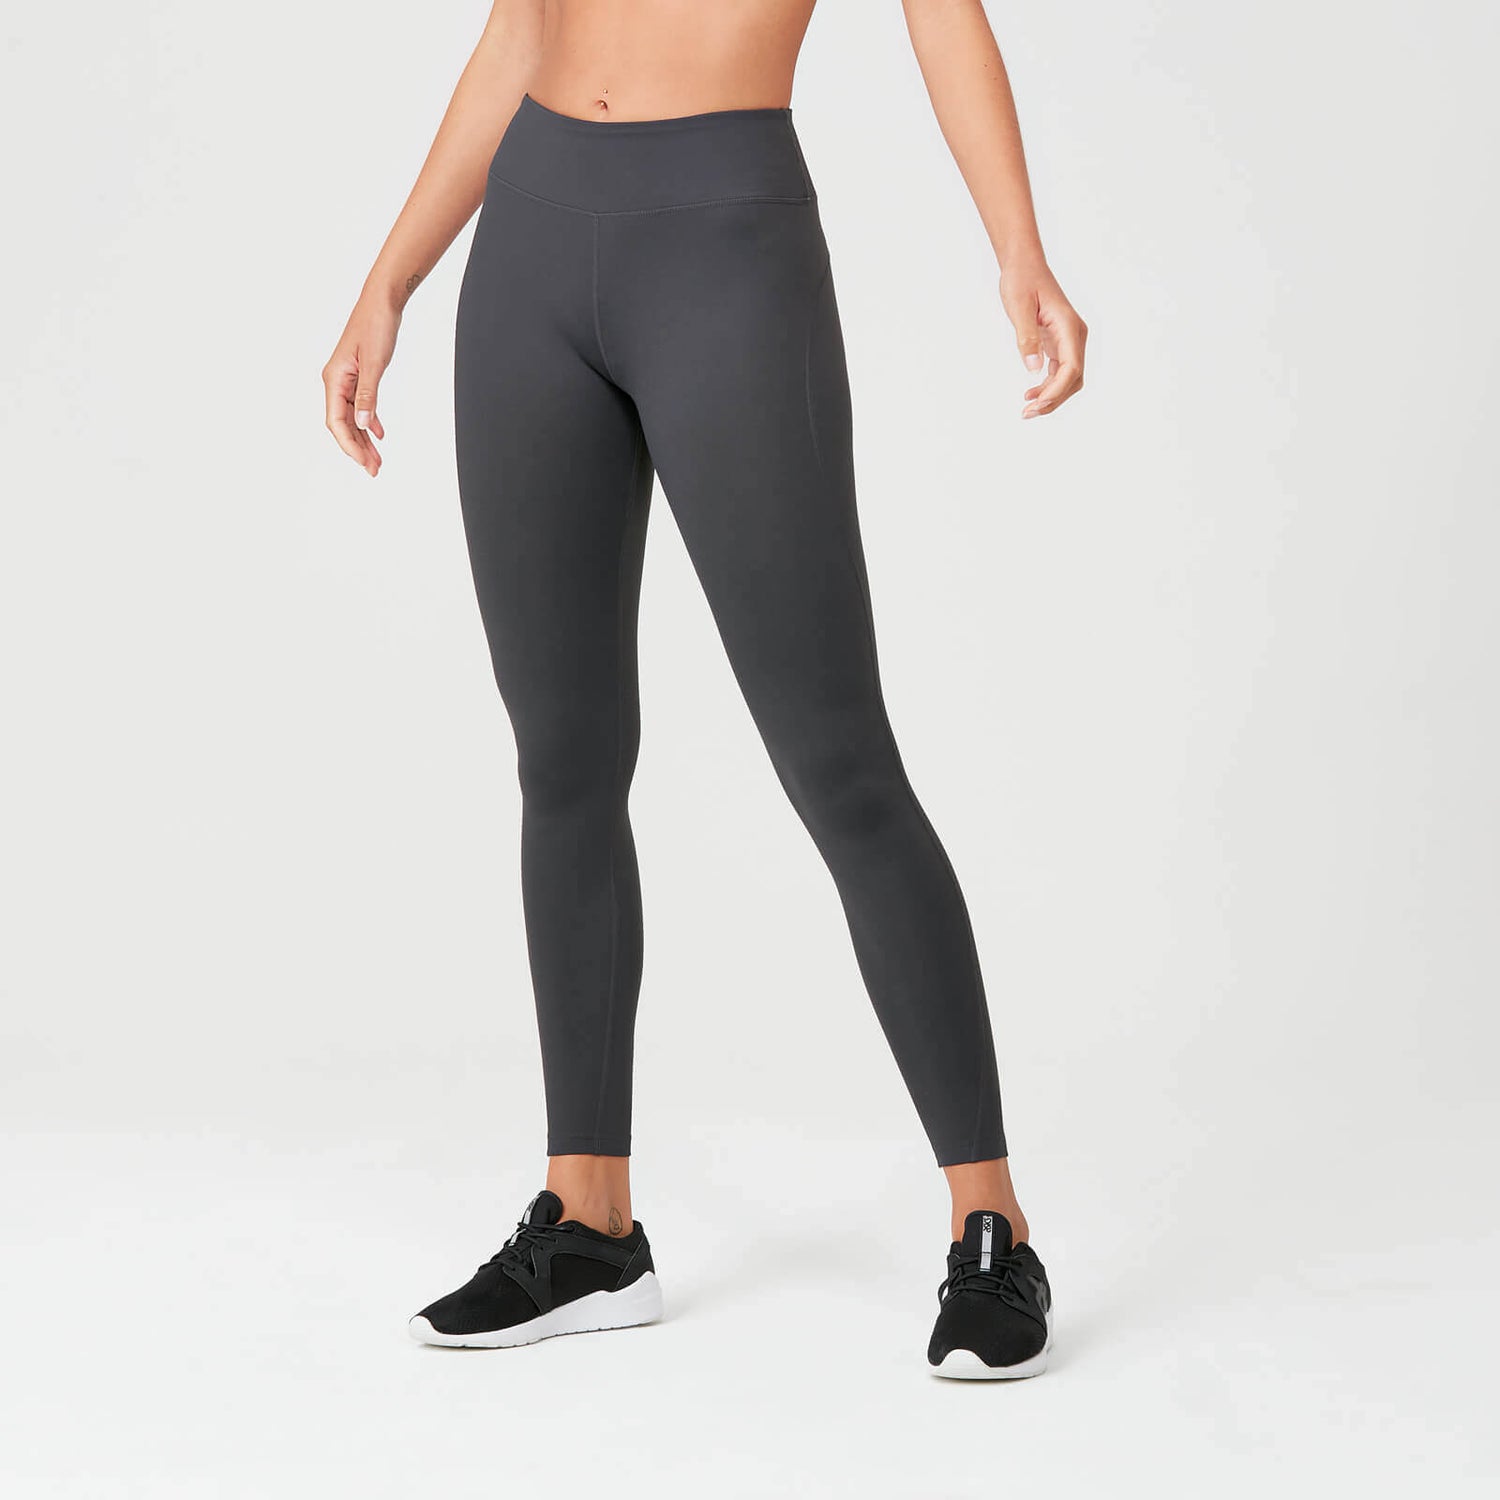 How To Find Squat-proof Leggings. Nike RO